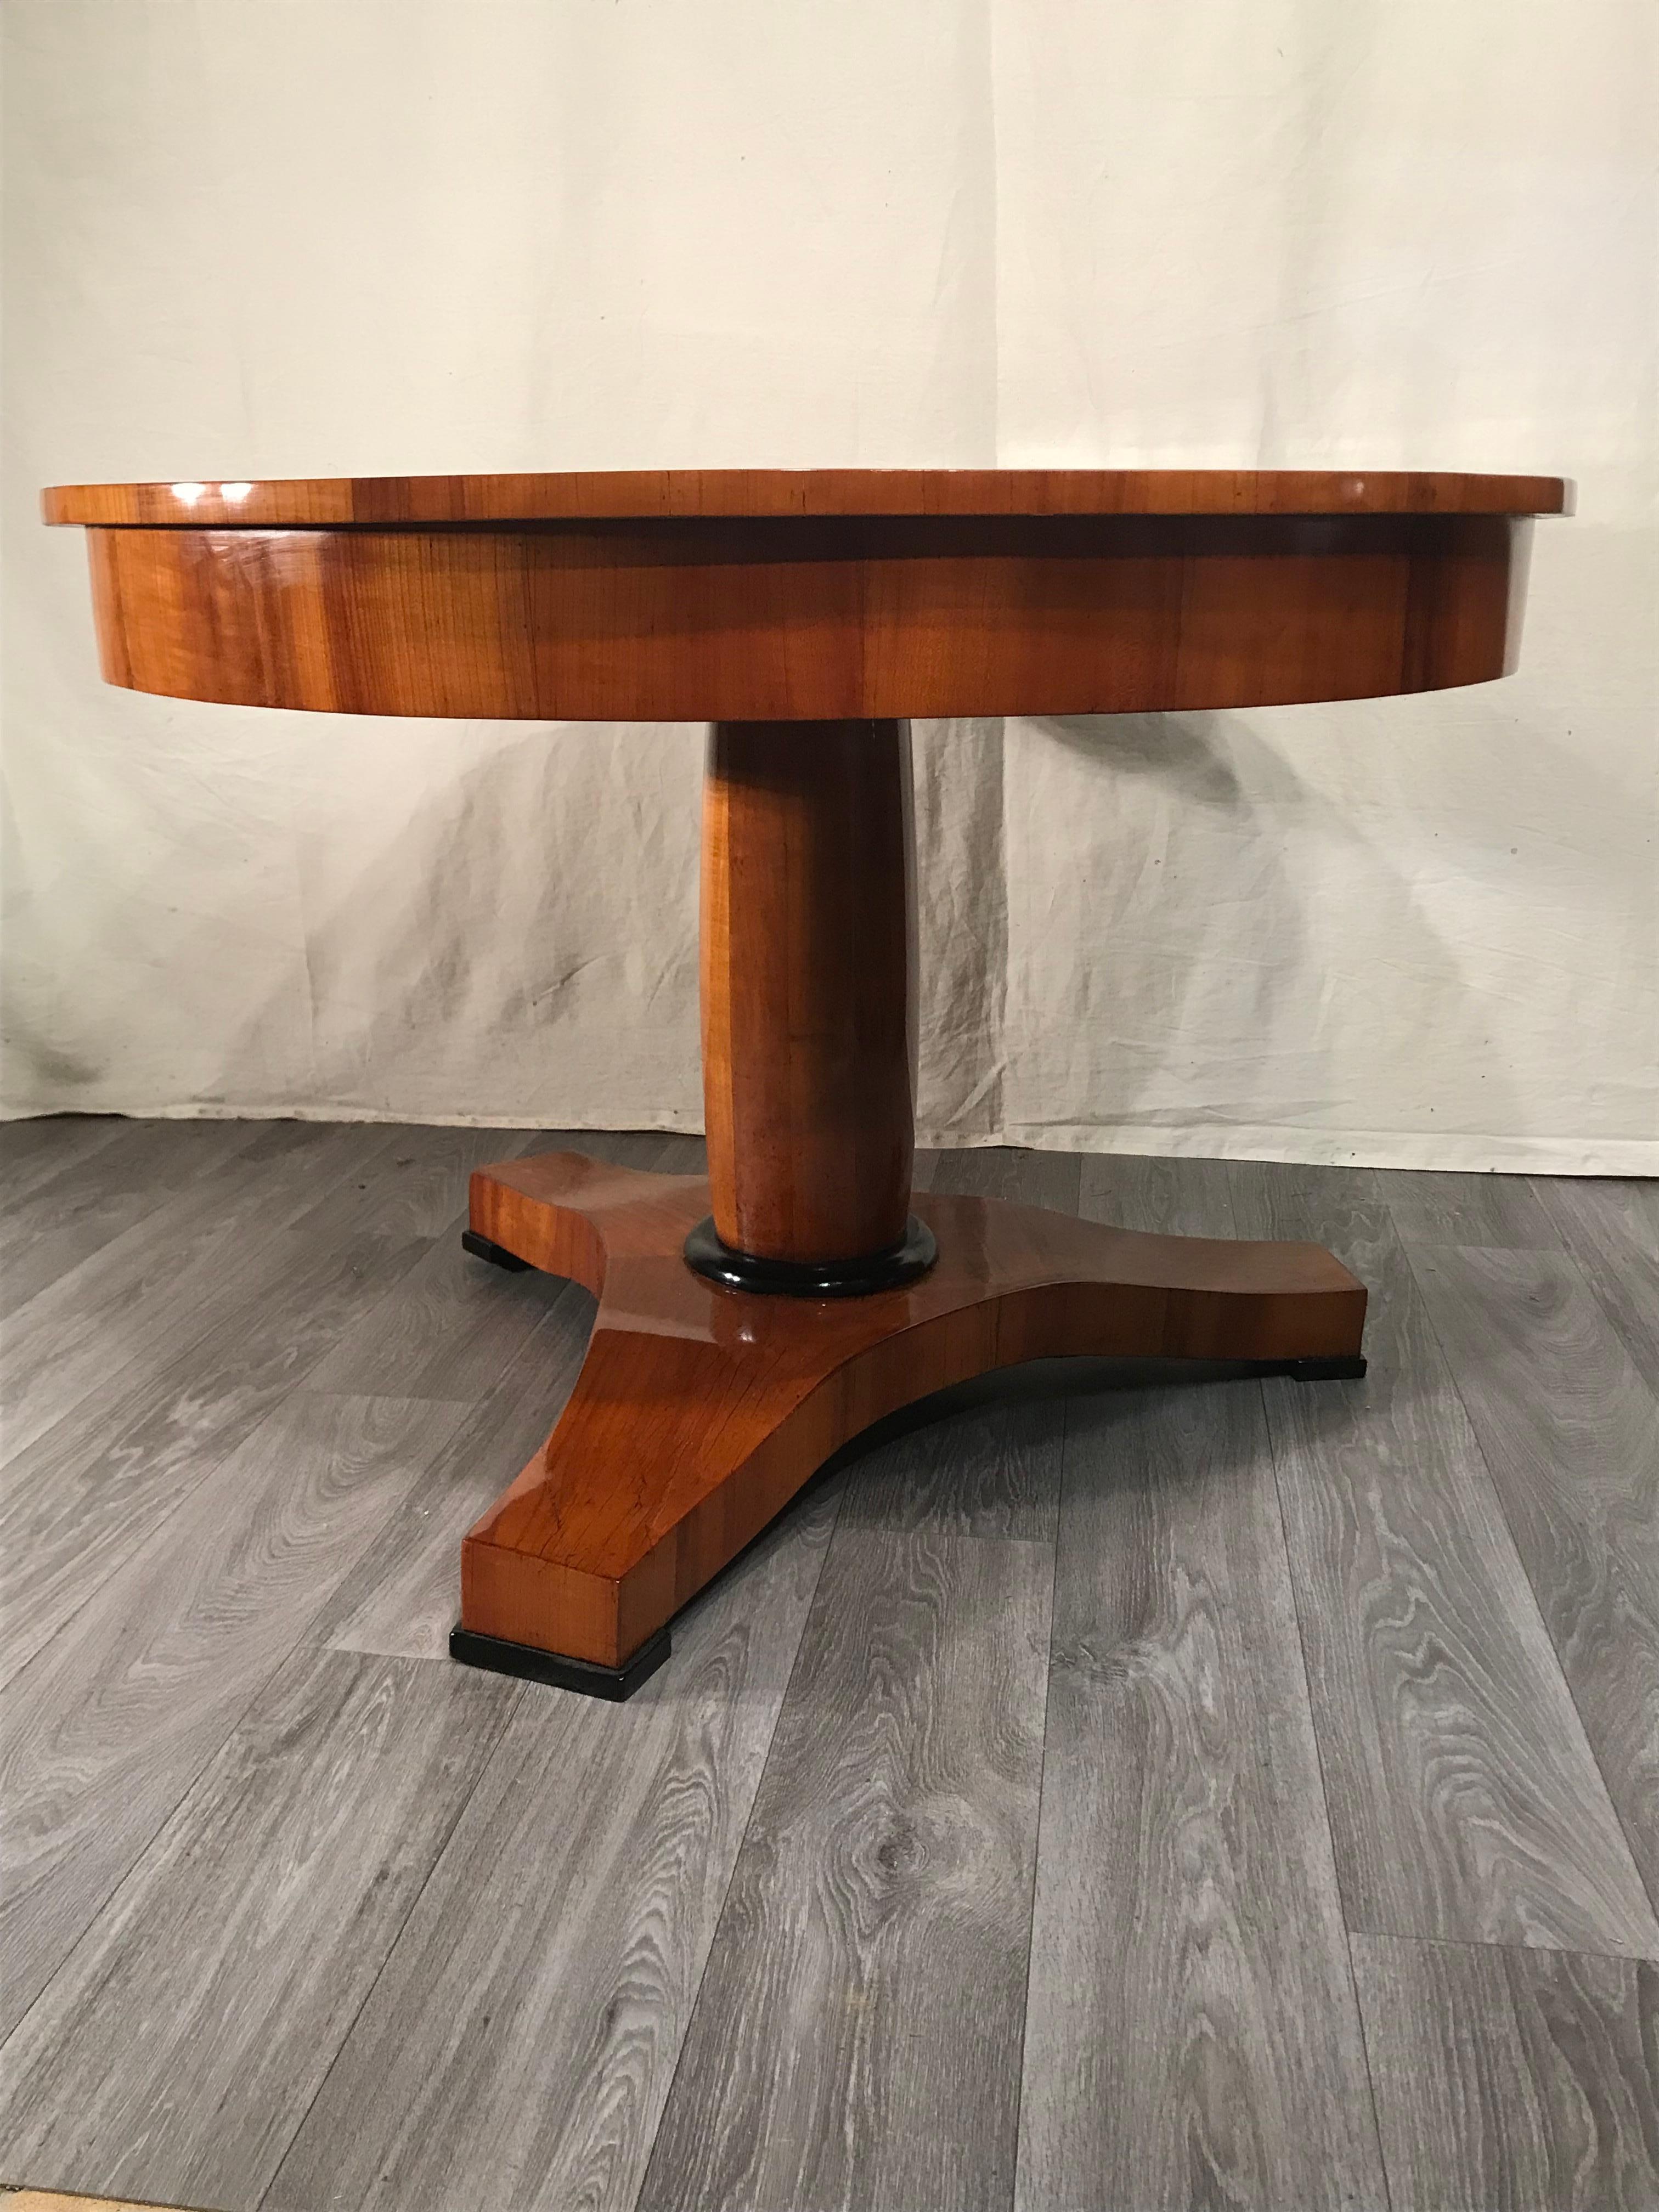 This original Biedermeier table dates back to around 1820-30 and comes from Southern Germany. The table has a central column which stands on a trefoil base. All parts have a very pretty cherry veneer. The top is decorated with a piecrust cherry